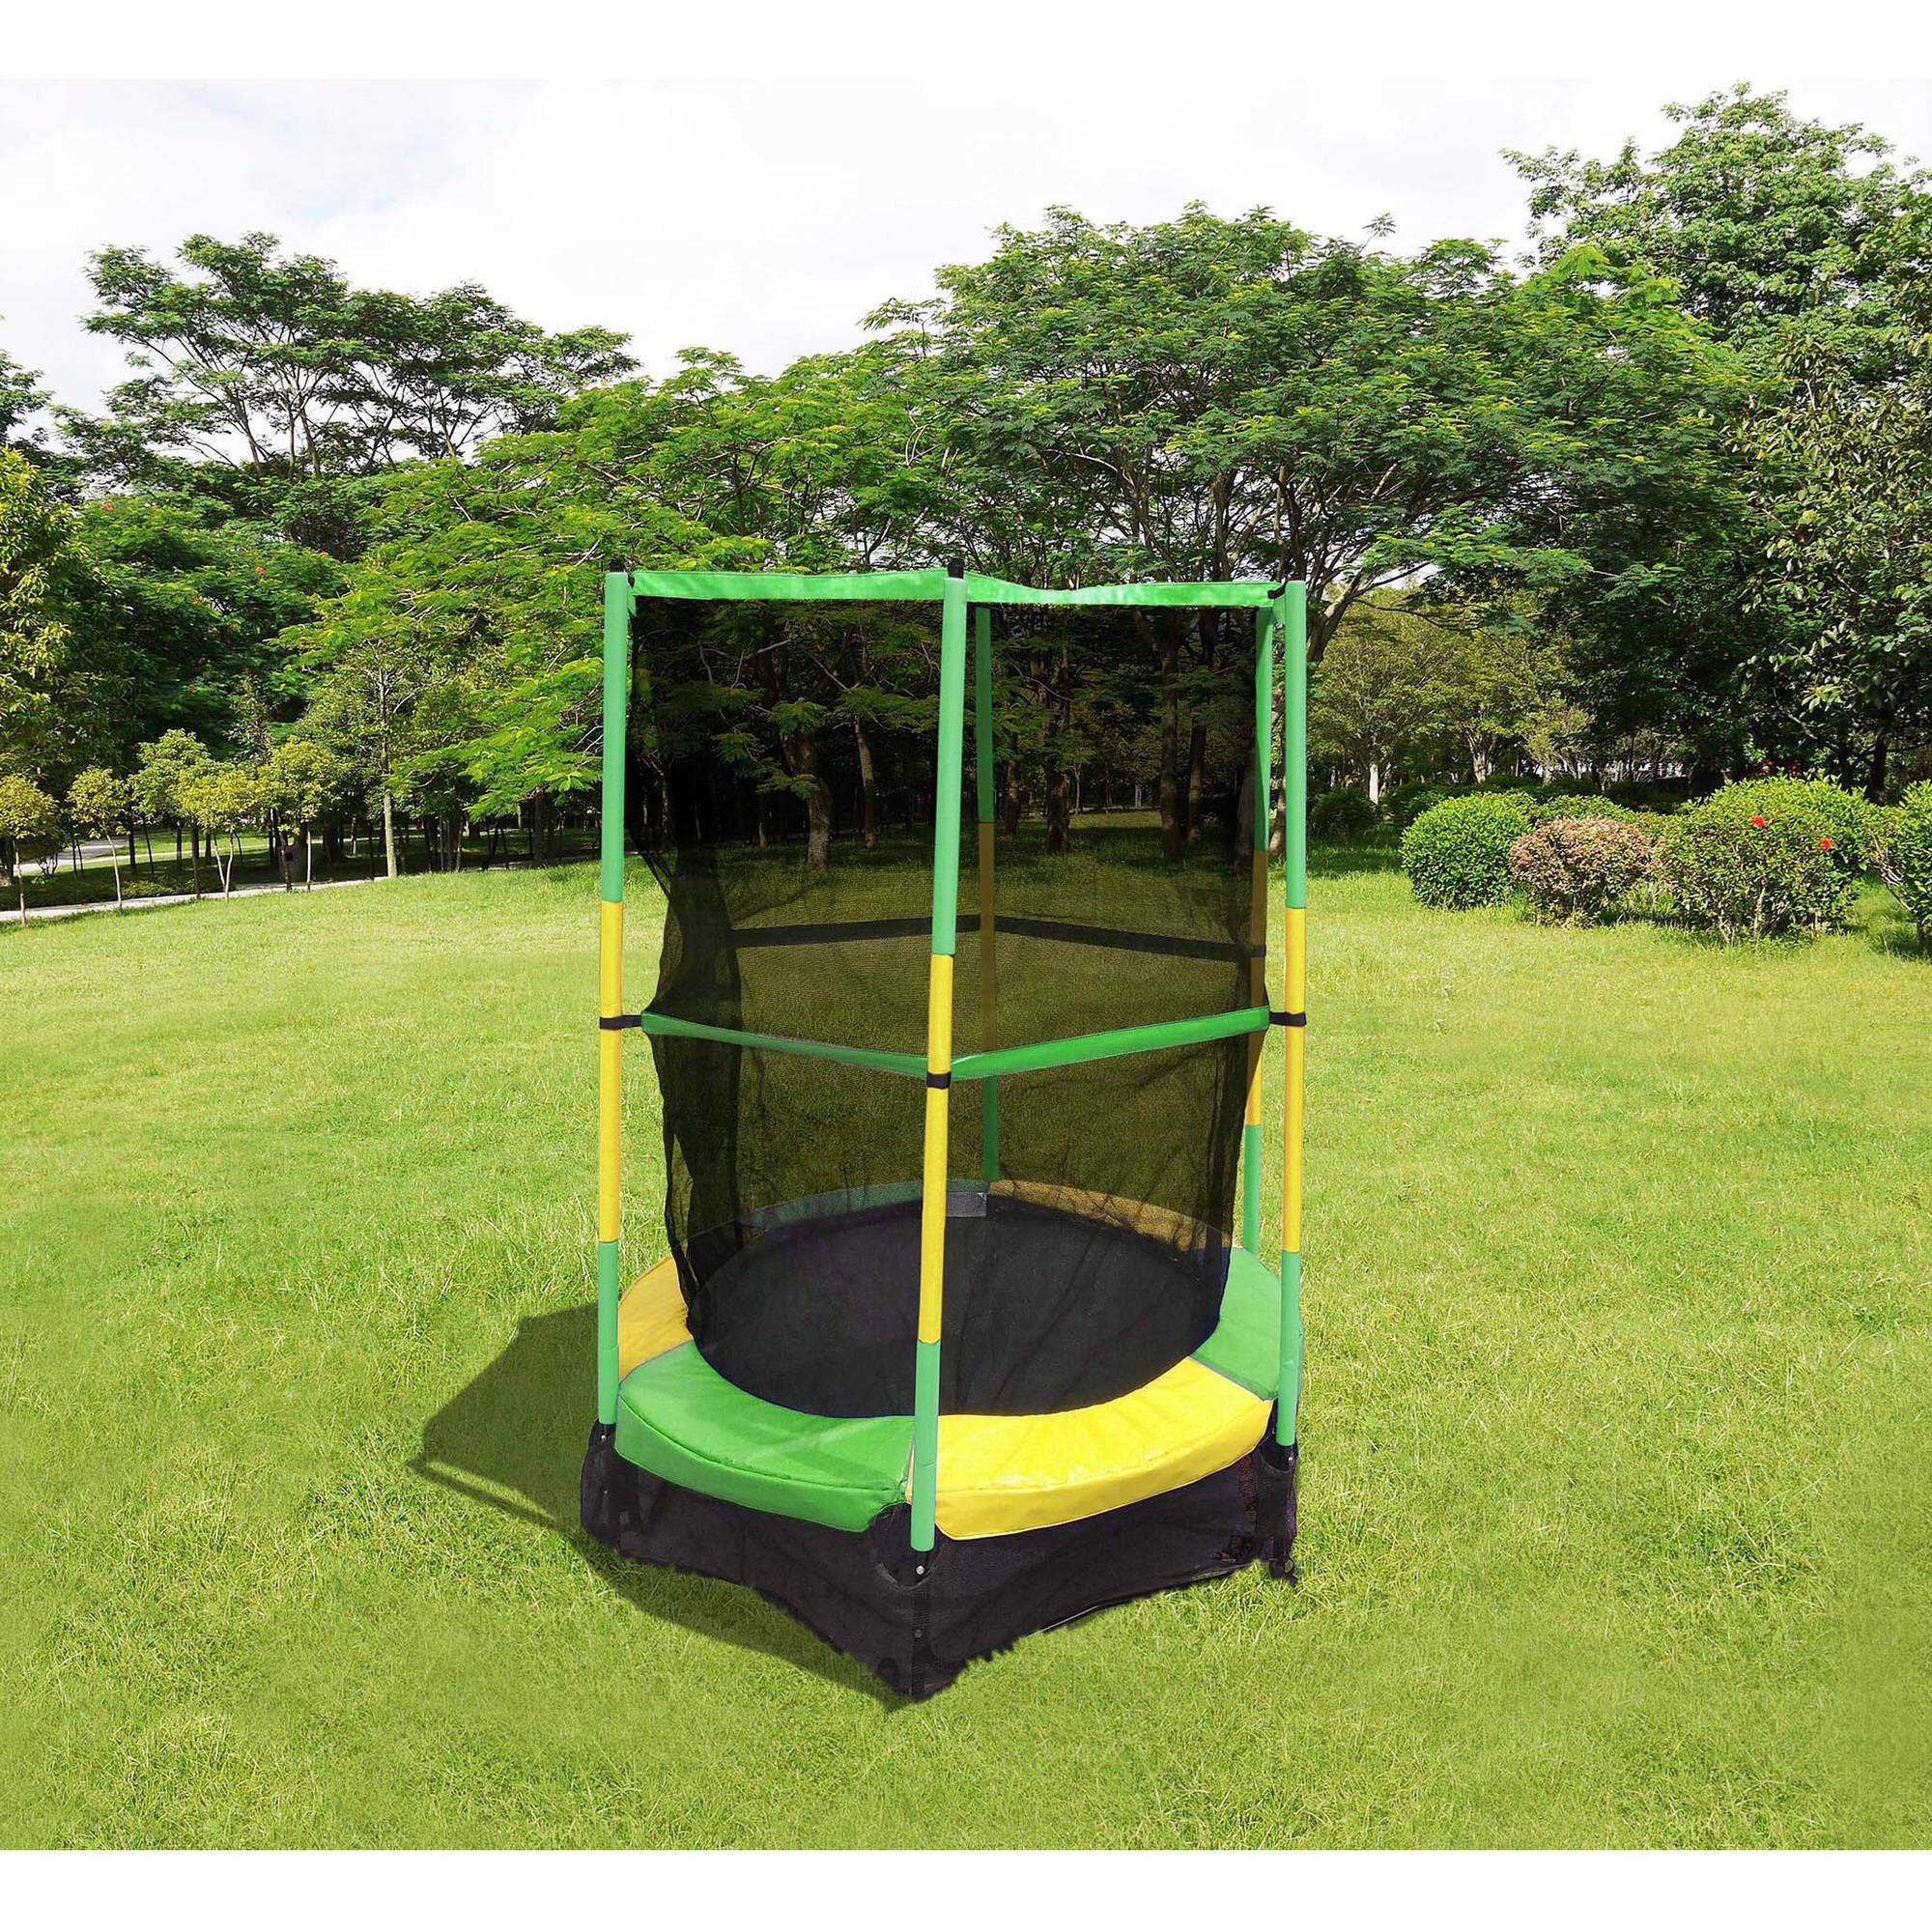 Bounce Pro 55-Inch My First Trampoline, with Safety Enclosure, Green - image 2 of 4